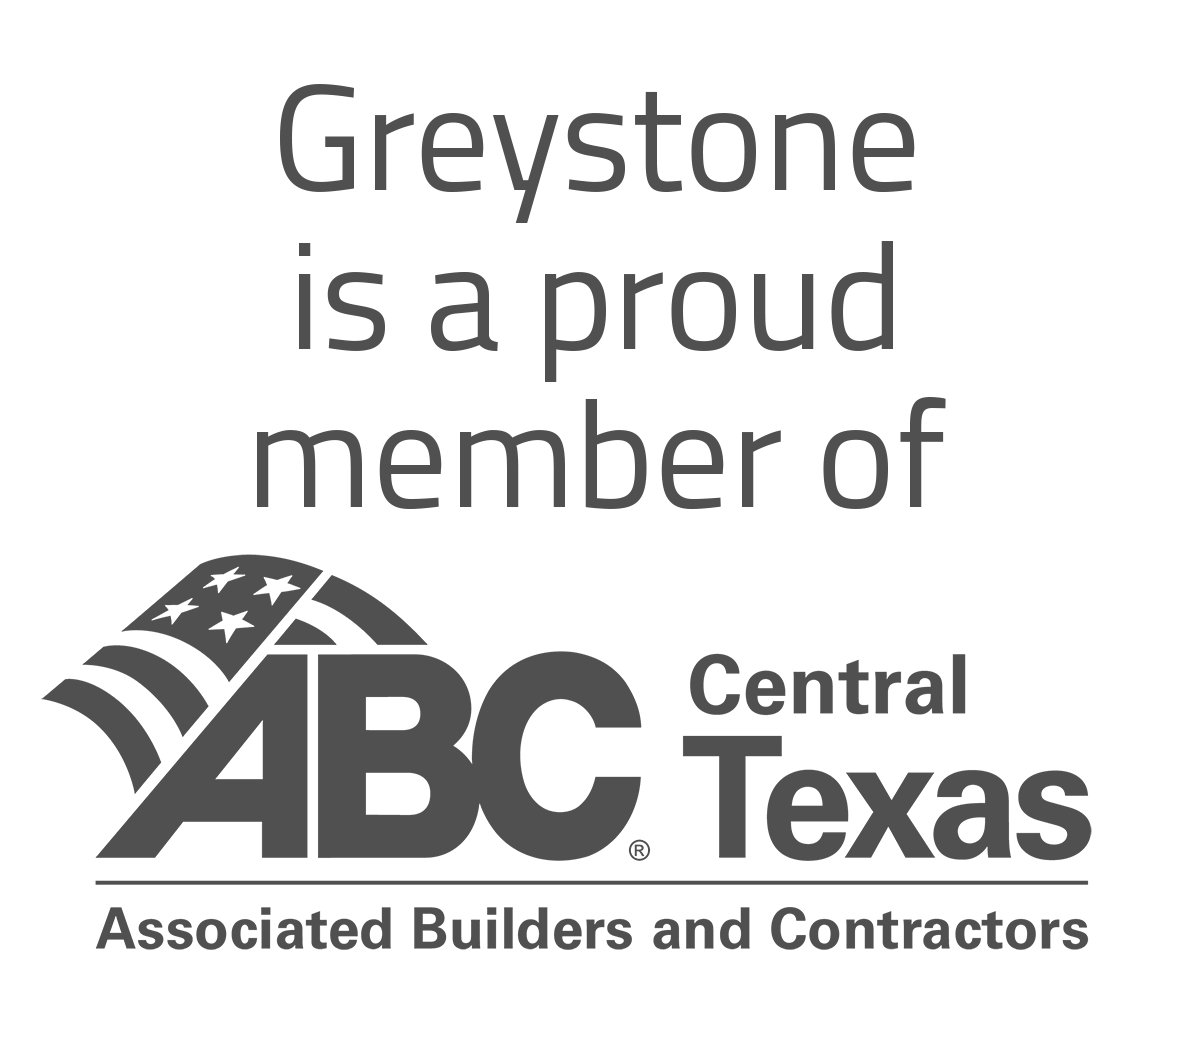 1987 is the year Greystone was established